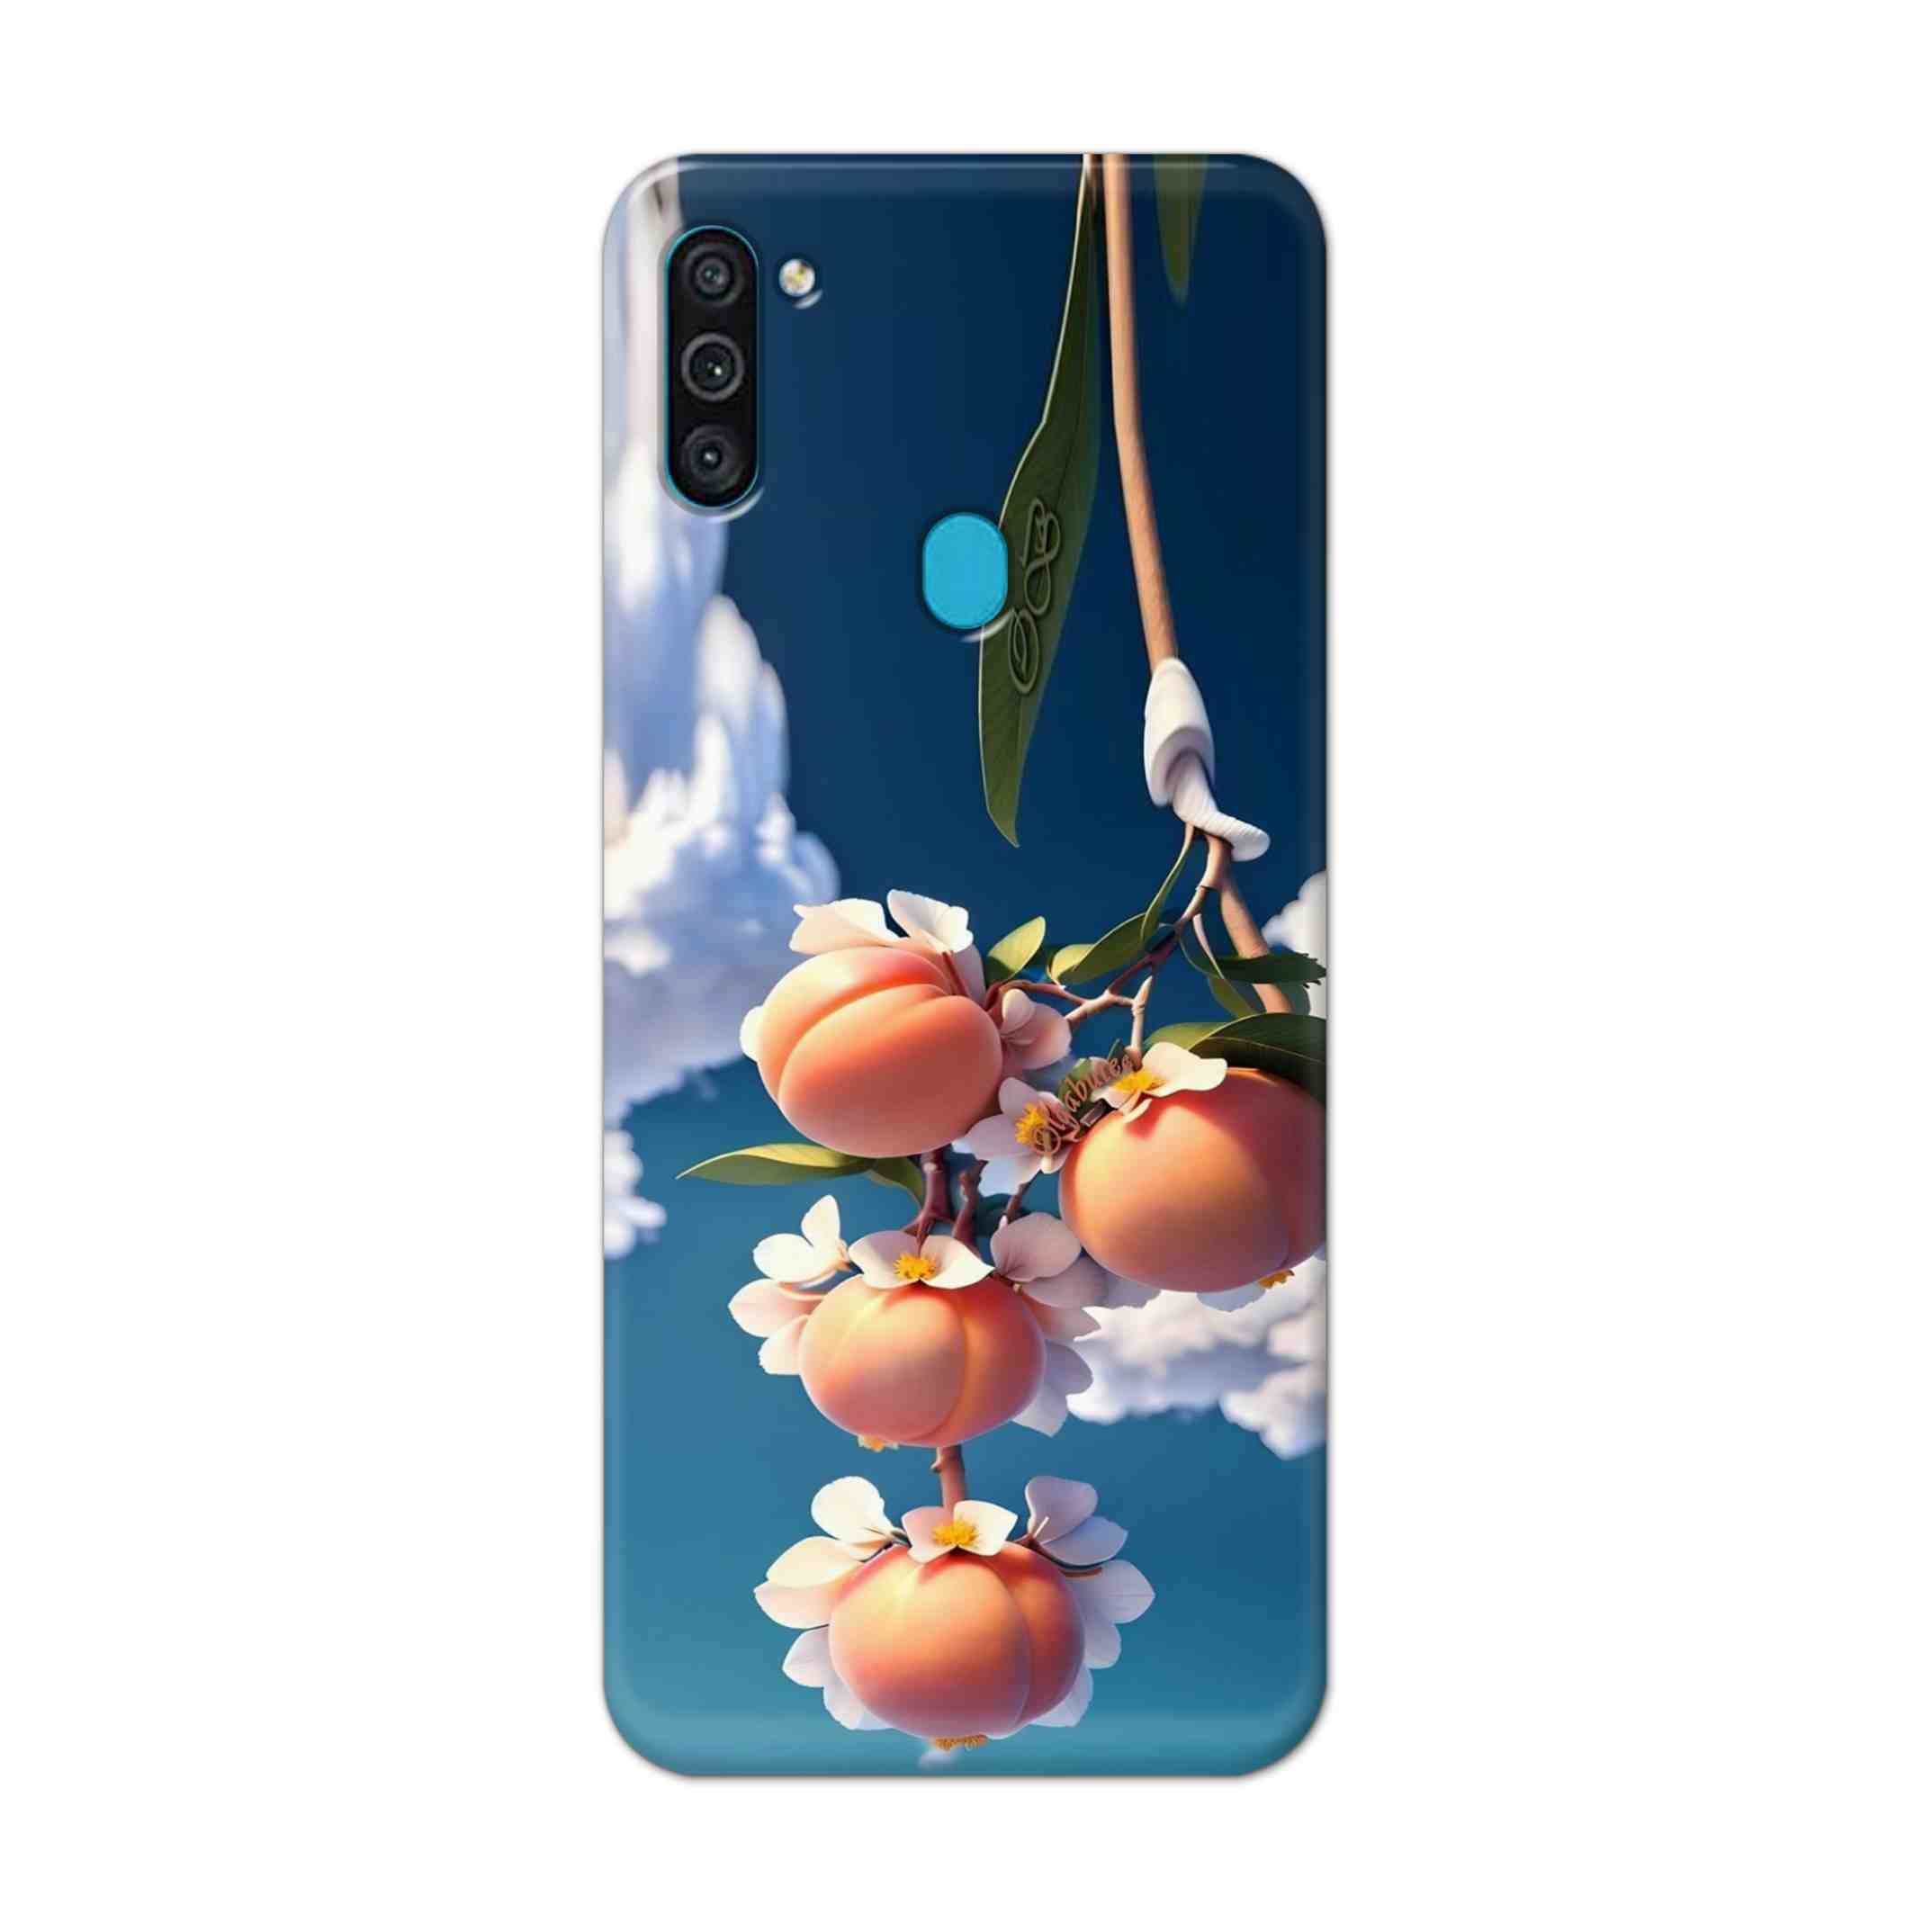 Buy Fruit Hard Back Mobile Phone Case Cover For Samsung Galaxy M11 Online